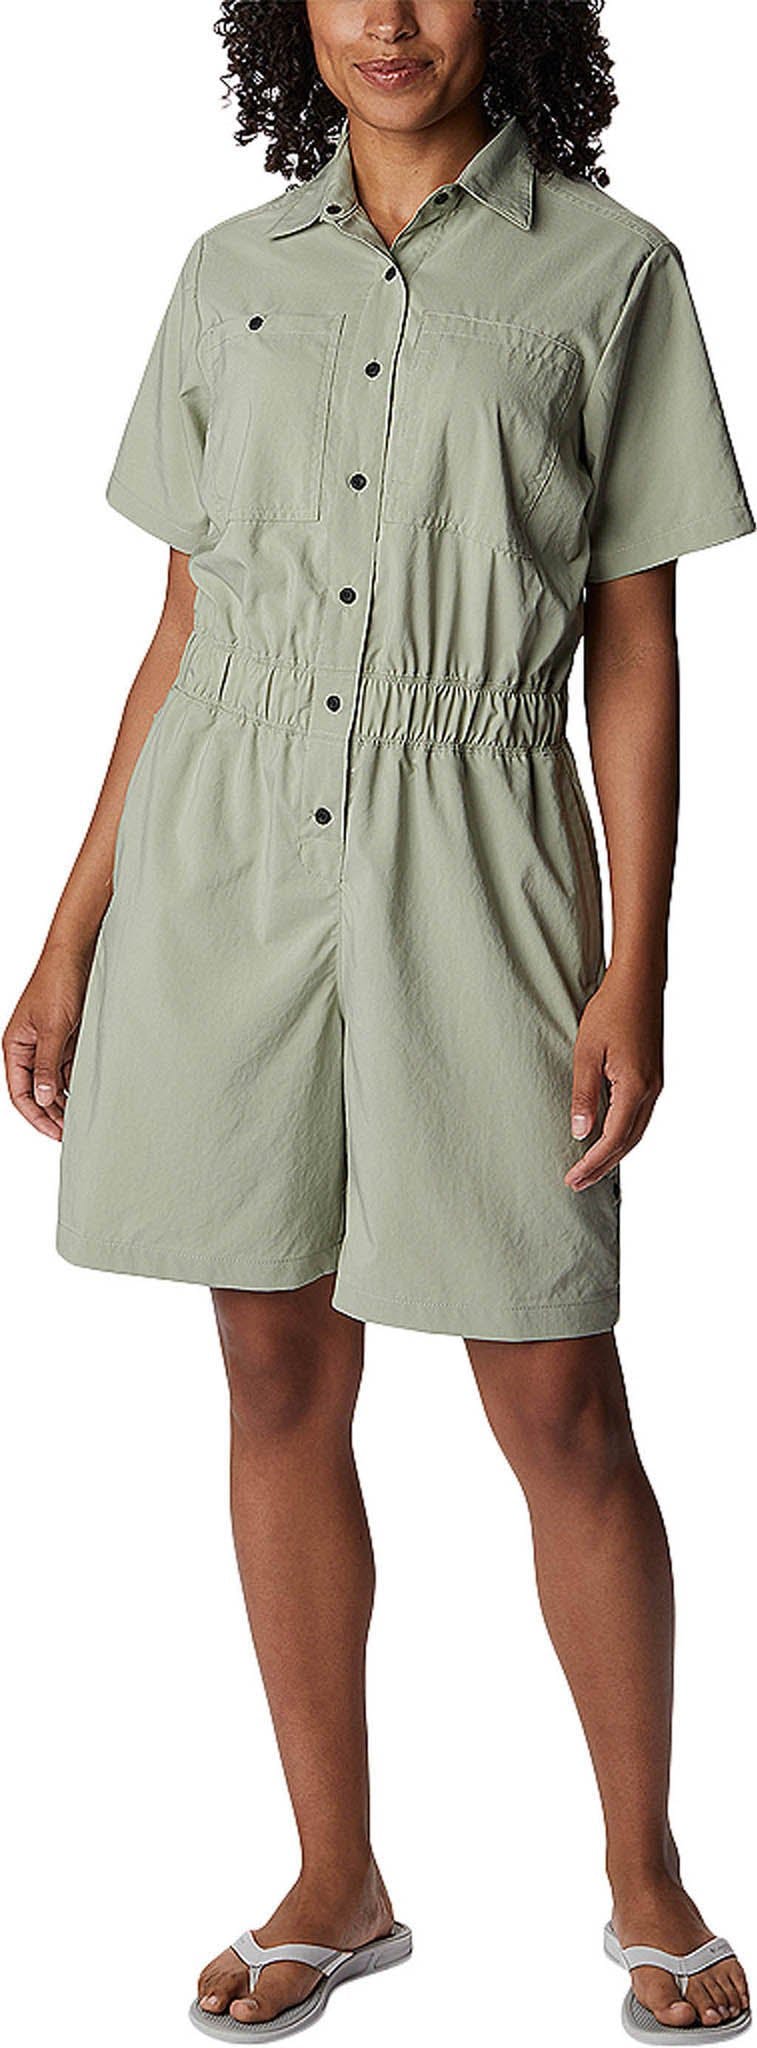 Product image for Silver Ridge Utility™ Romper - Women's